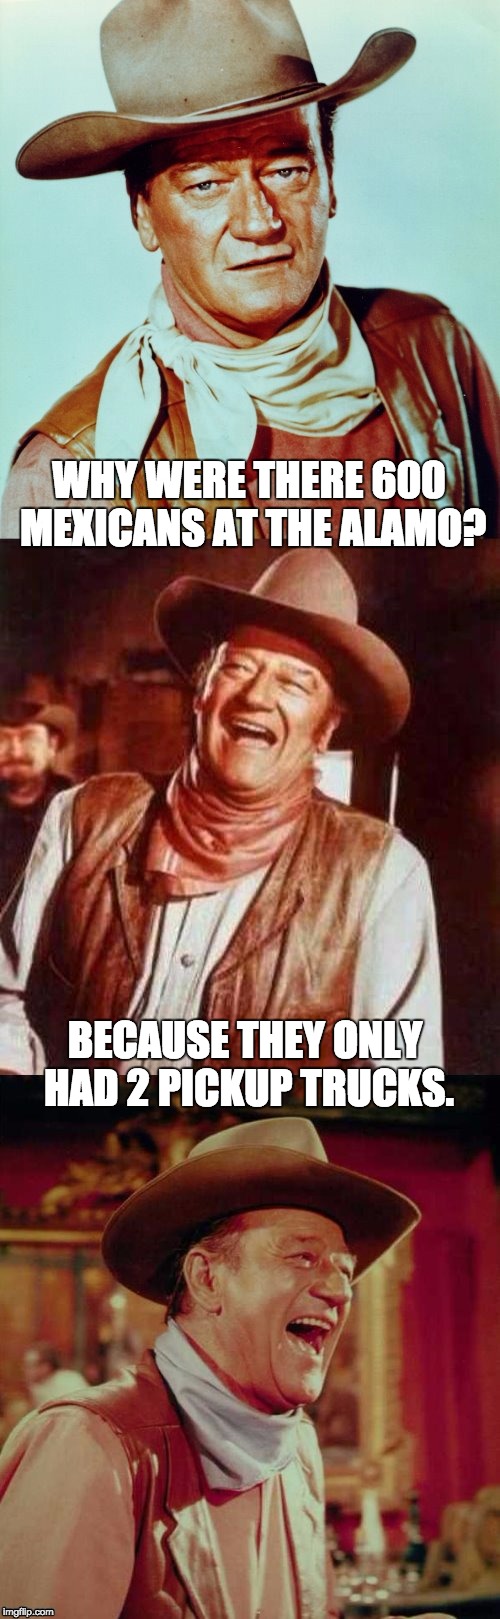 John Wayne Puns | WHY WERE THERE 600 MEXICANS AT THE ALAMO? BECAUSE THEY ONLY HAD 2 PICKUP TRUCKS. | image tagged in john wayne puns | made w/ Imgflip meme maker